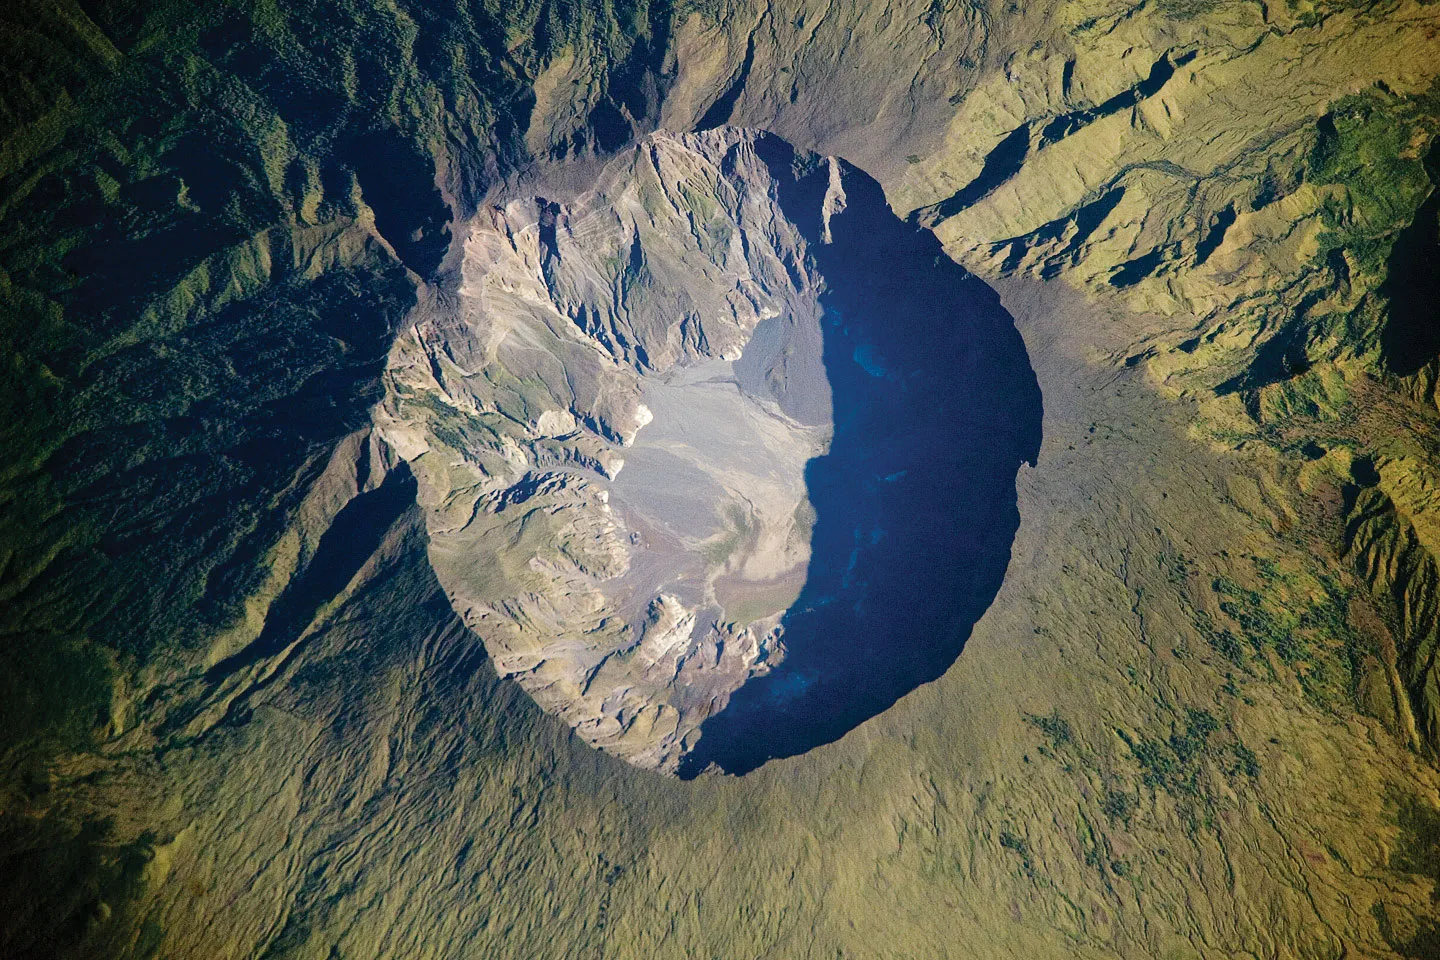 Mount Tambora and the history of Year Without a Summer